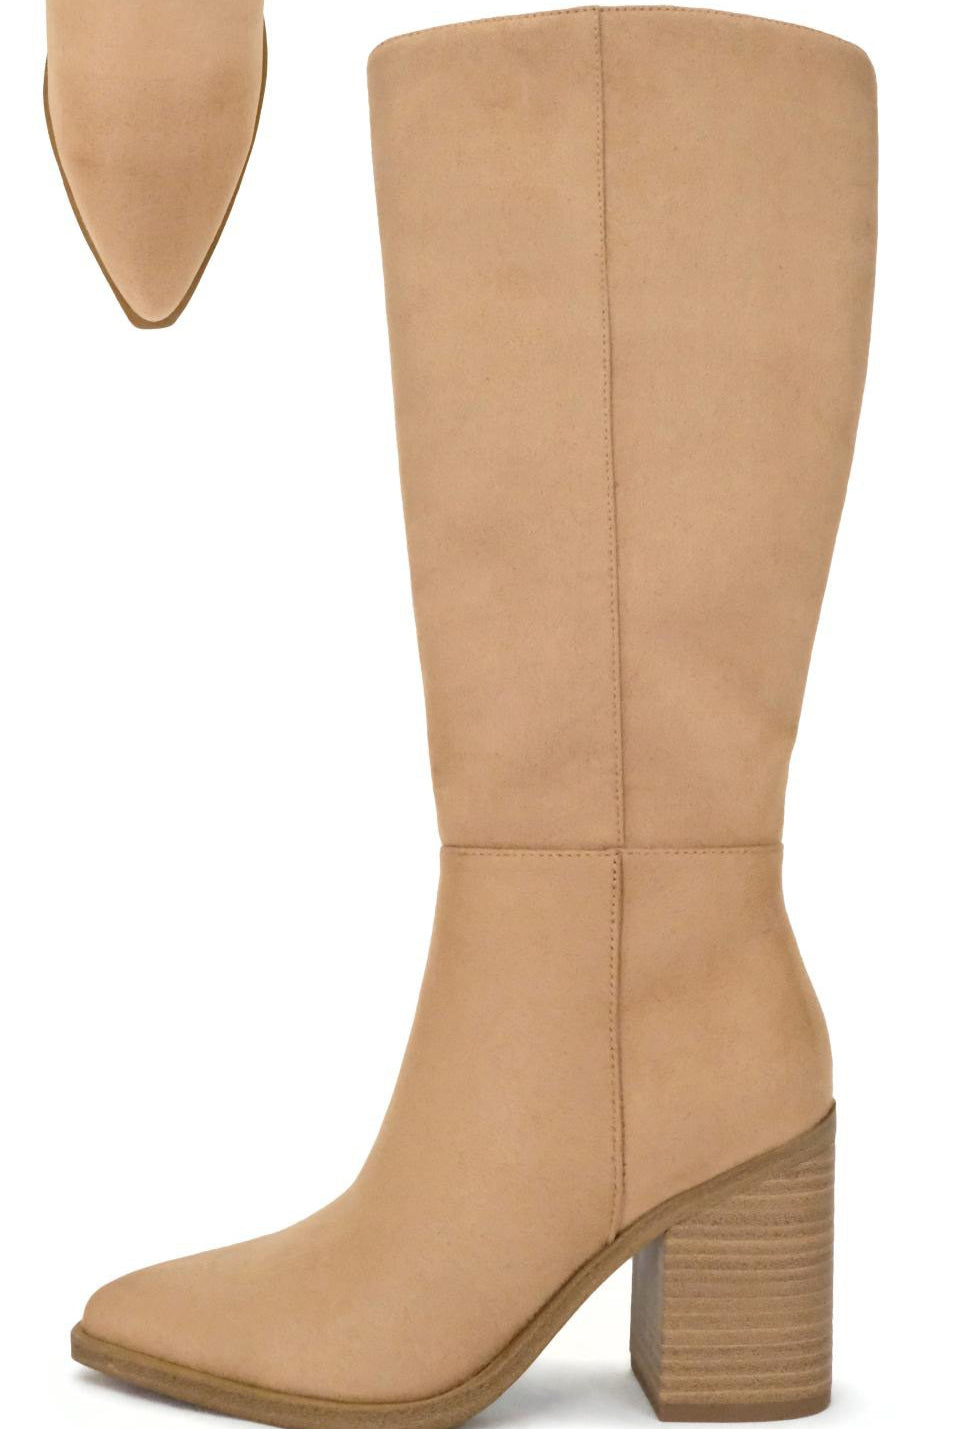 Vapor Pointed Toe Block Heel Knee Boots - Be You Boutique